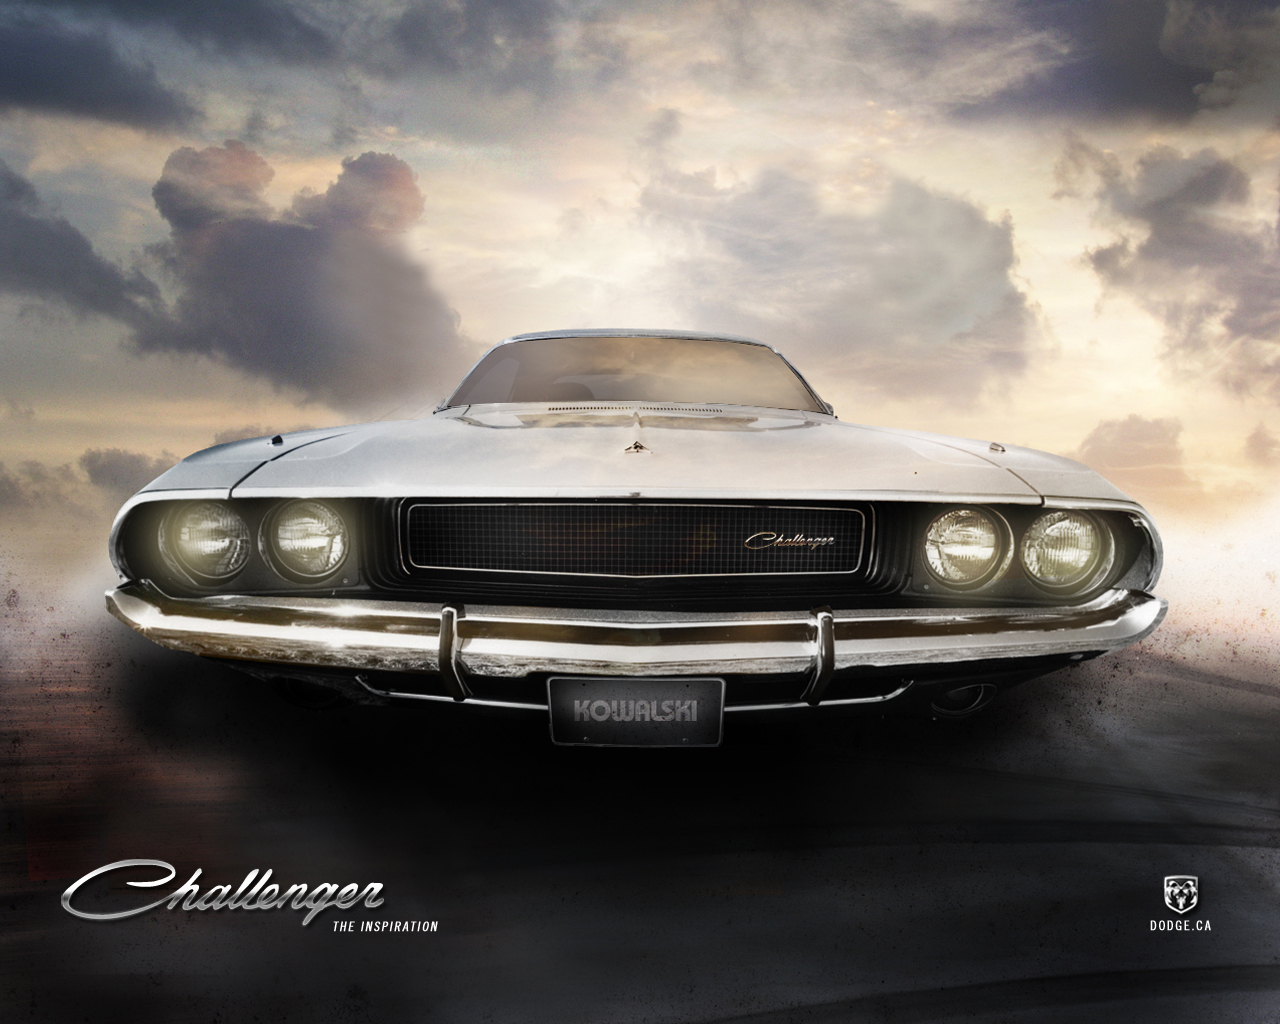 Free download 1970 Dodge Charger Wallpapers 4K 1280x1024 px 4USkY